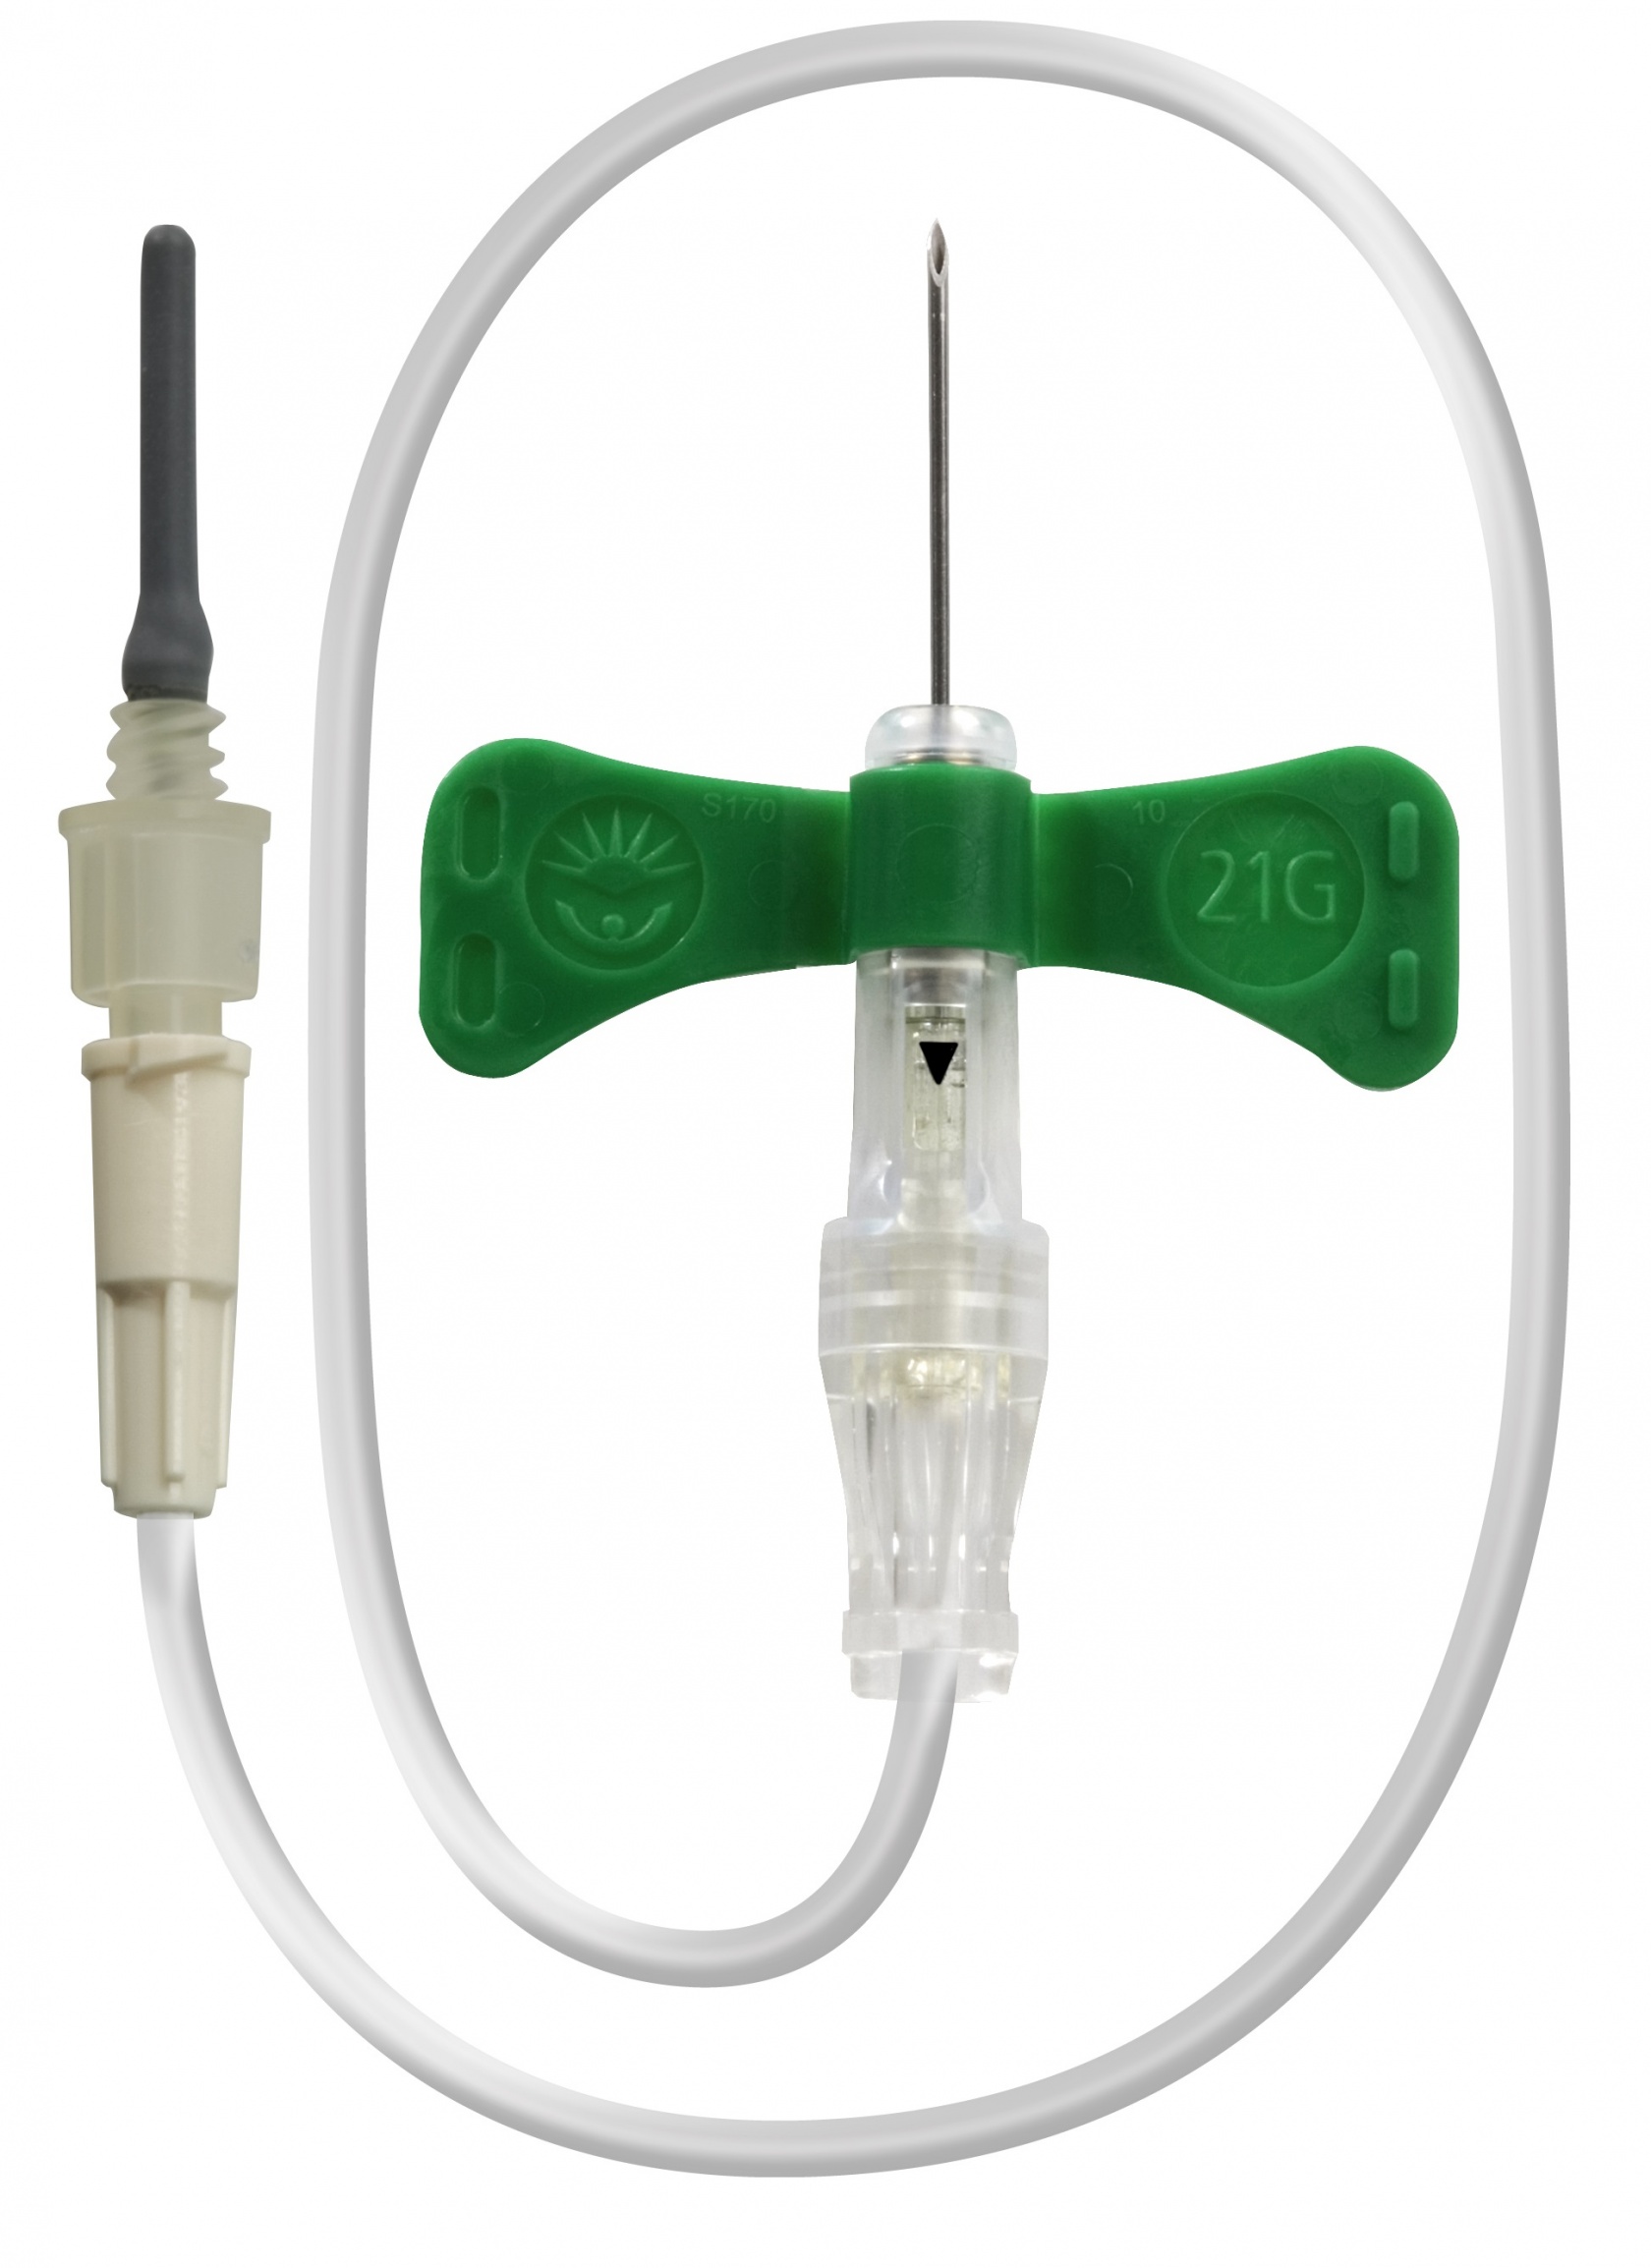 BD Vacutainer Push Button Blood Collection Set 12inch tubing with L/L 21g x 75in (Green)